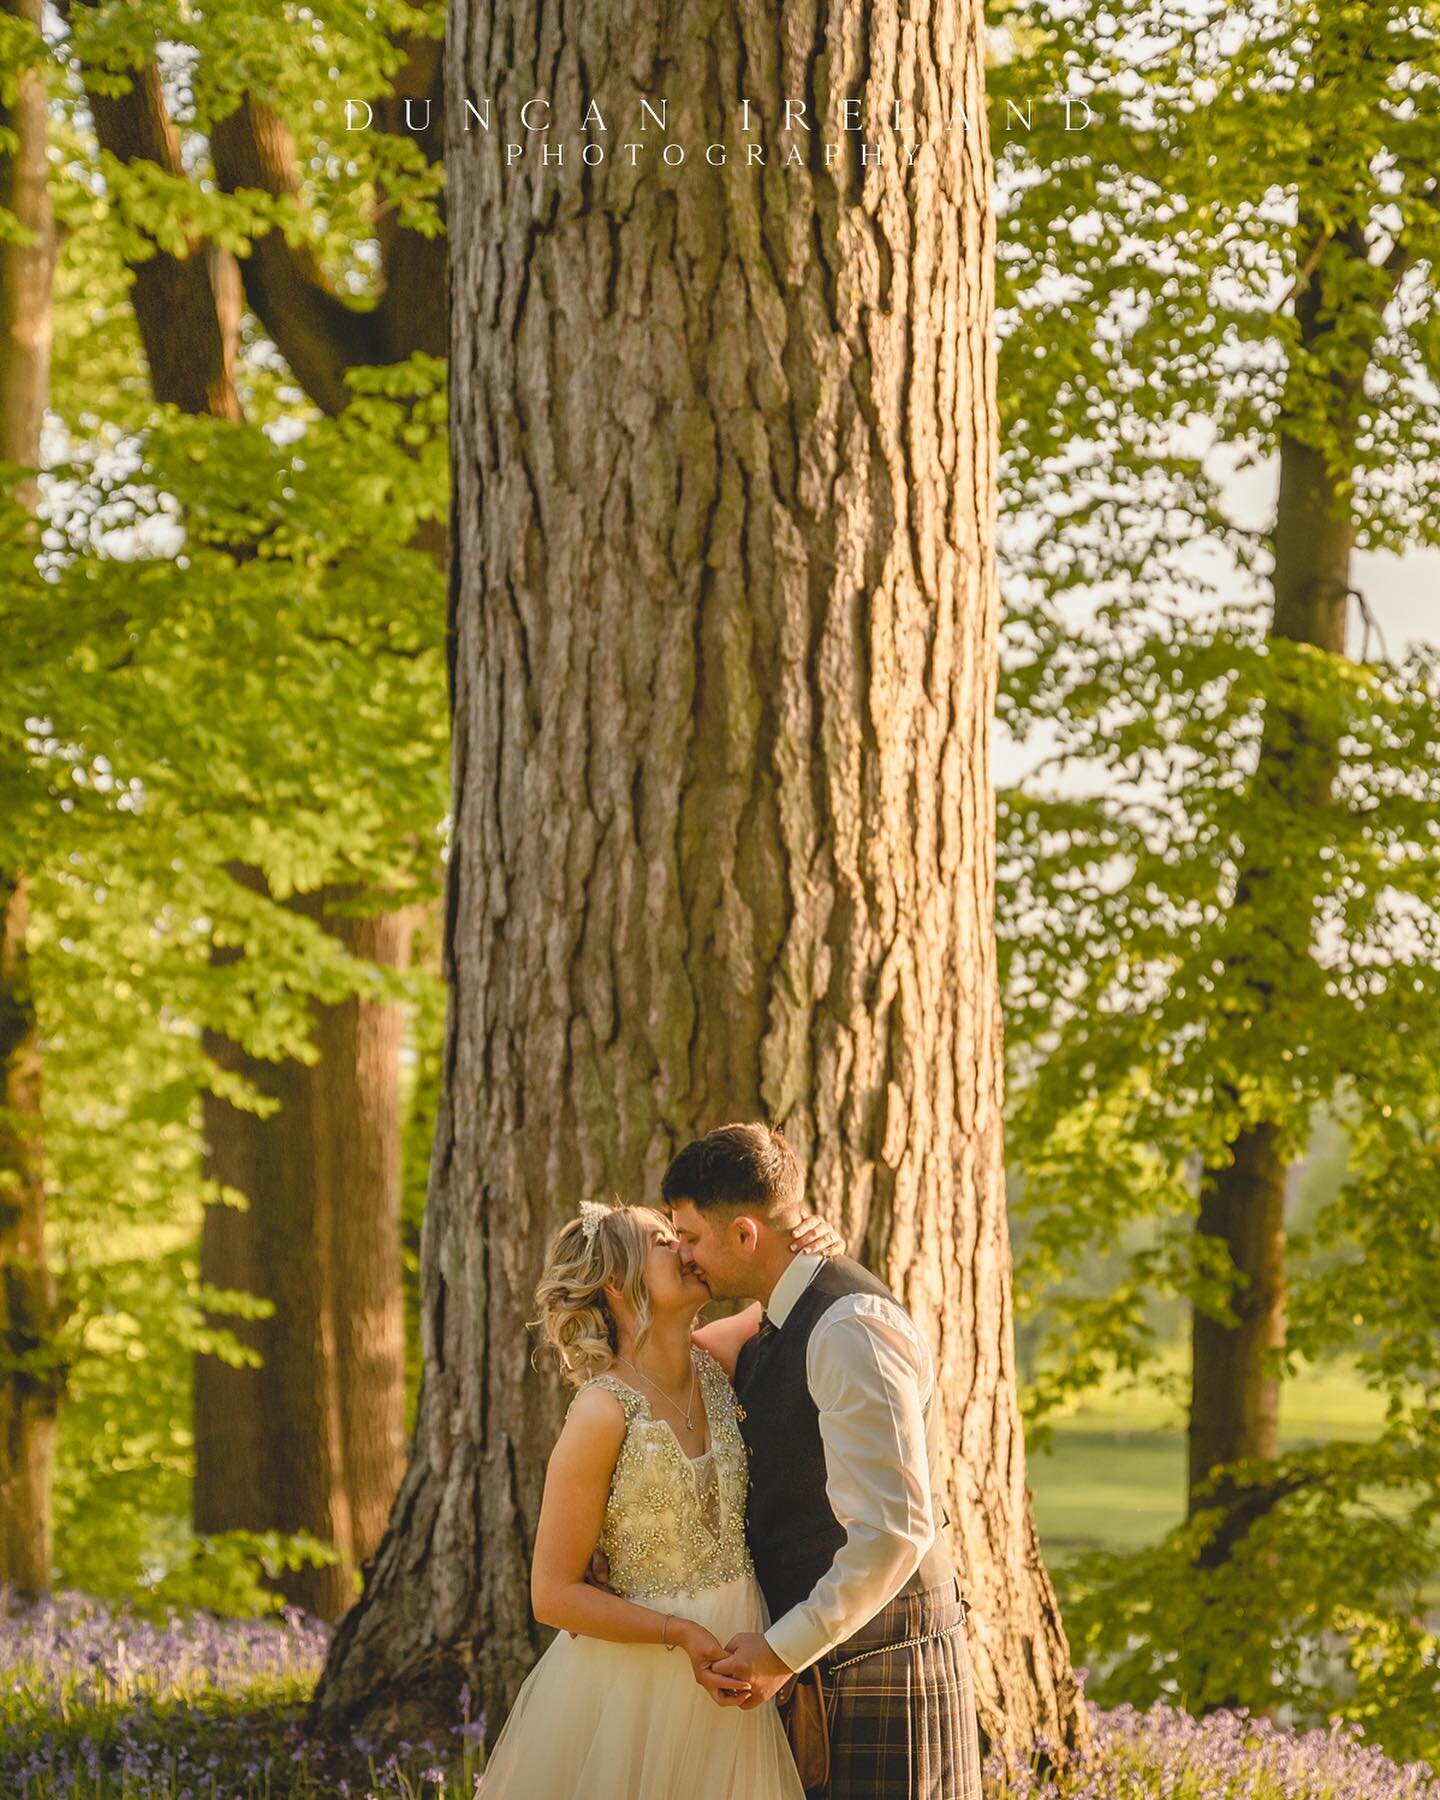 Abby &amp; Nathan&rsquo;s Dalswinton @dalswintonestateweddings wedding - the peak of Spring and gorgeous May light&hellip;  Days like these are what we treasure, special times with love all around and the kind of light that touches your soul!  The be